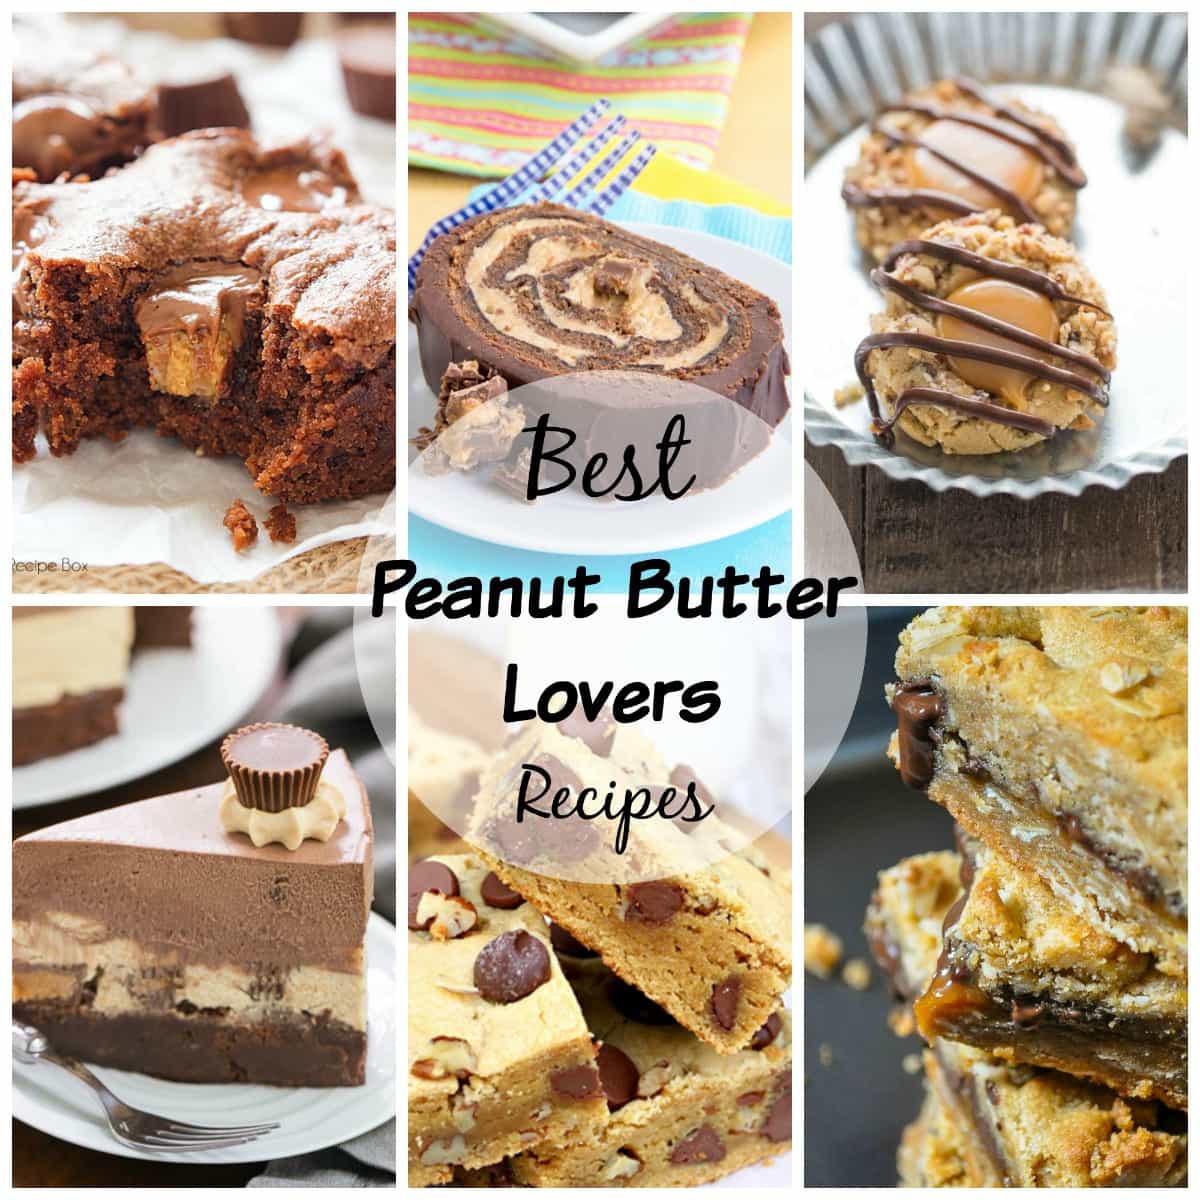 Peanut butter recipe lovers rejoice! This round up is just for you!